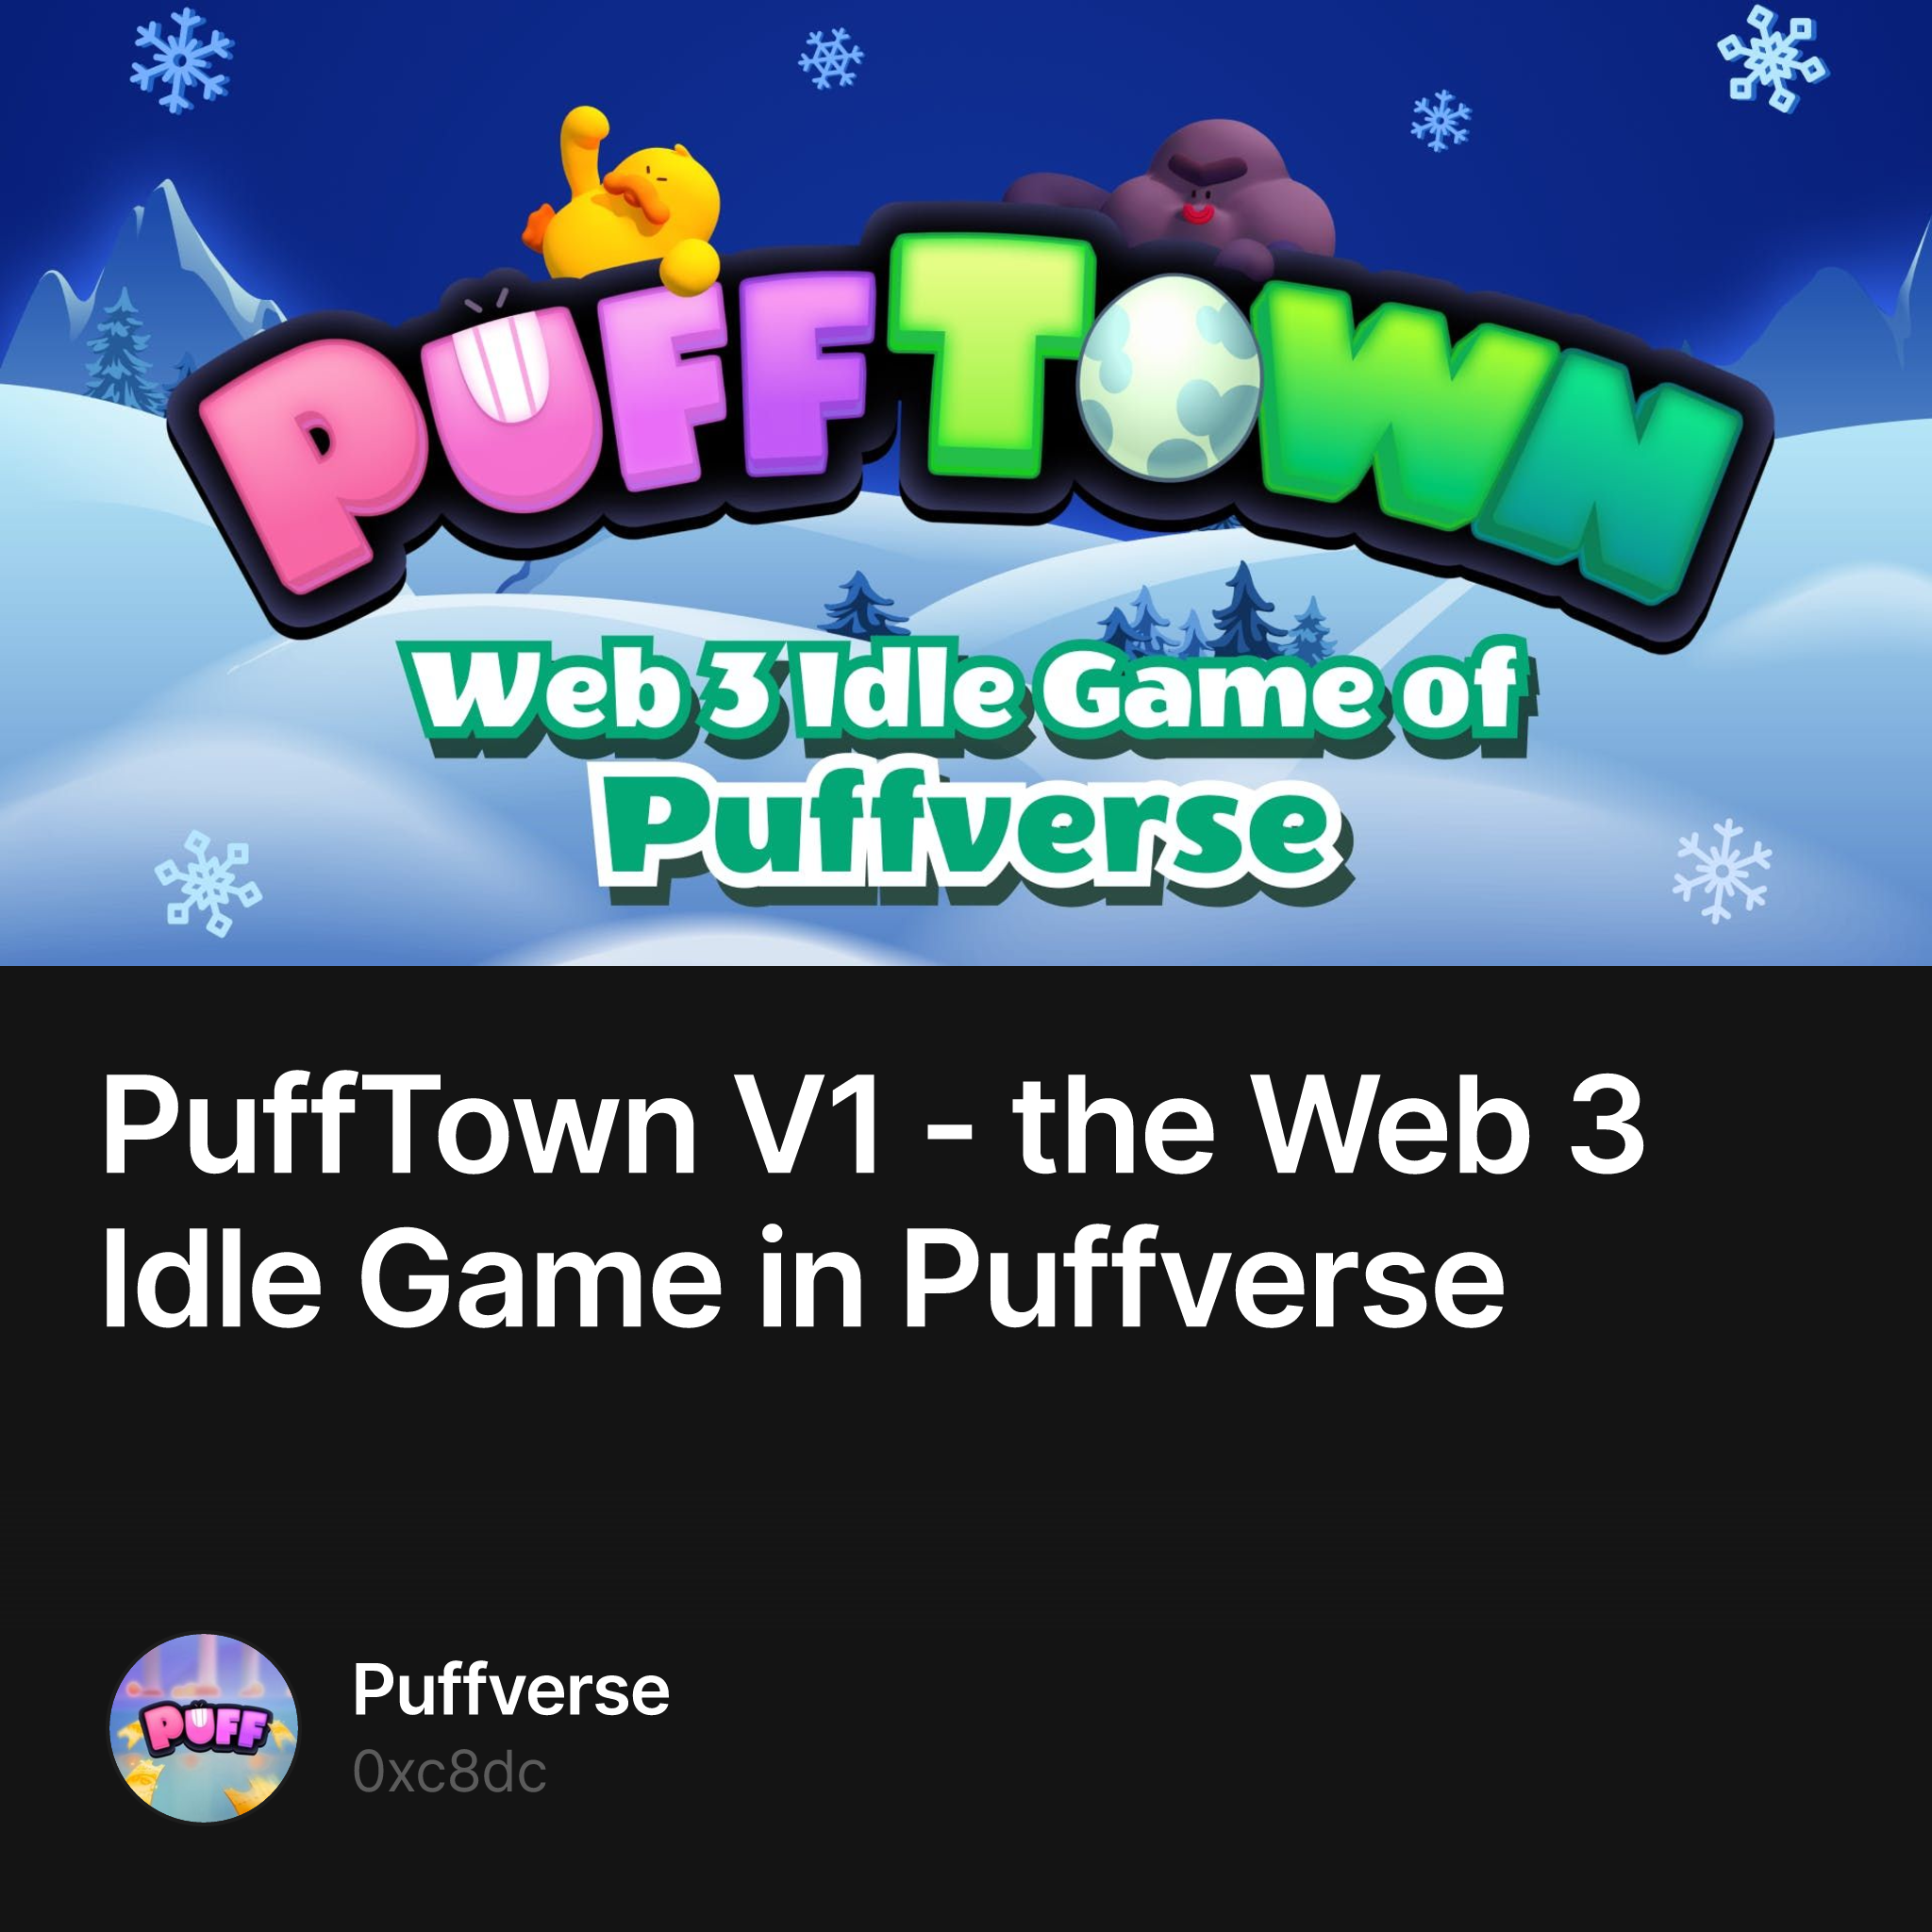 The Launch of PuffTown V1 and Puffverse Overview